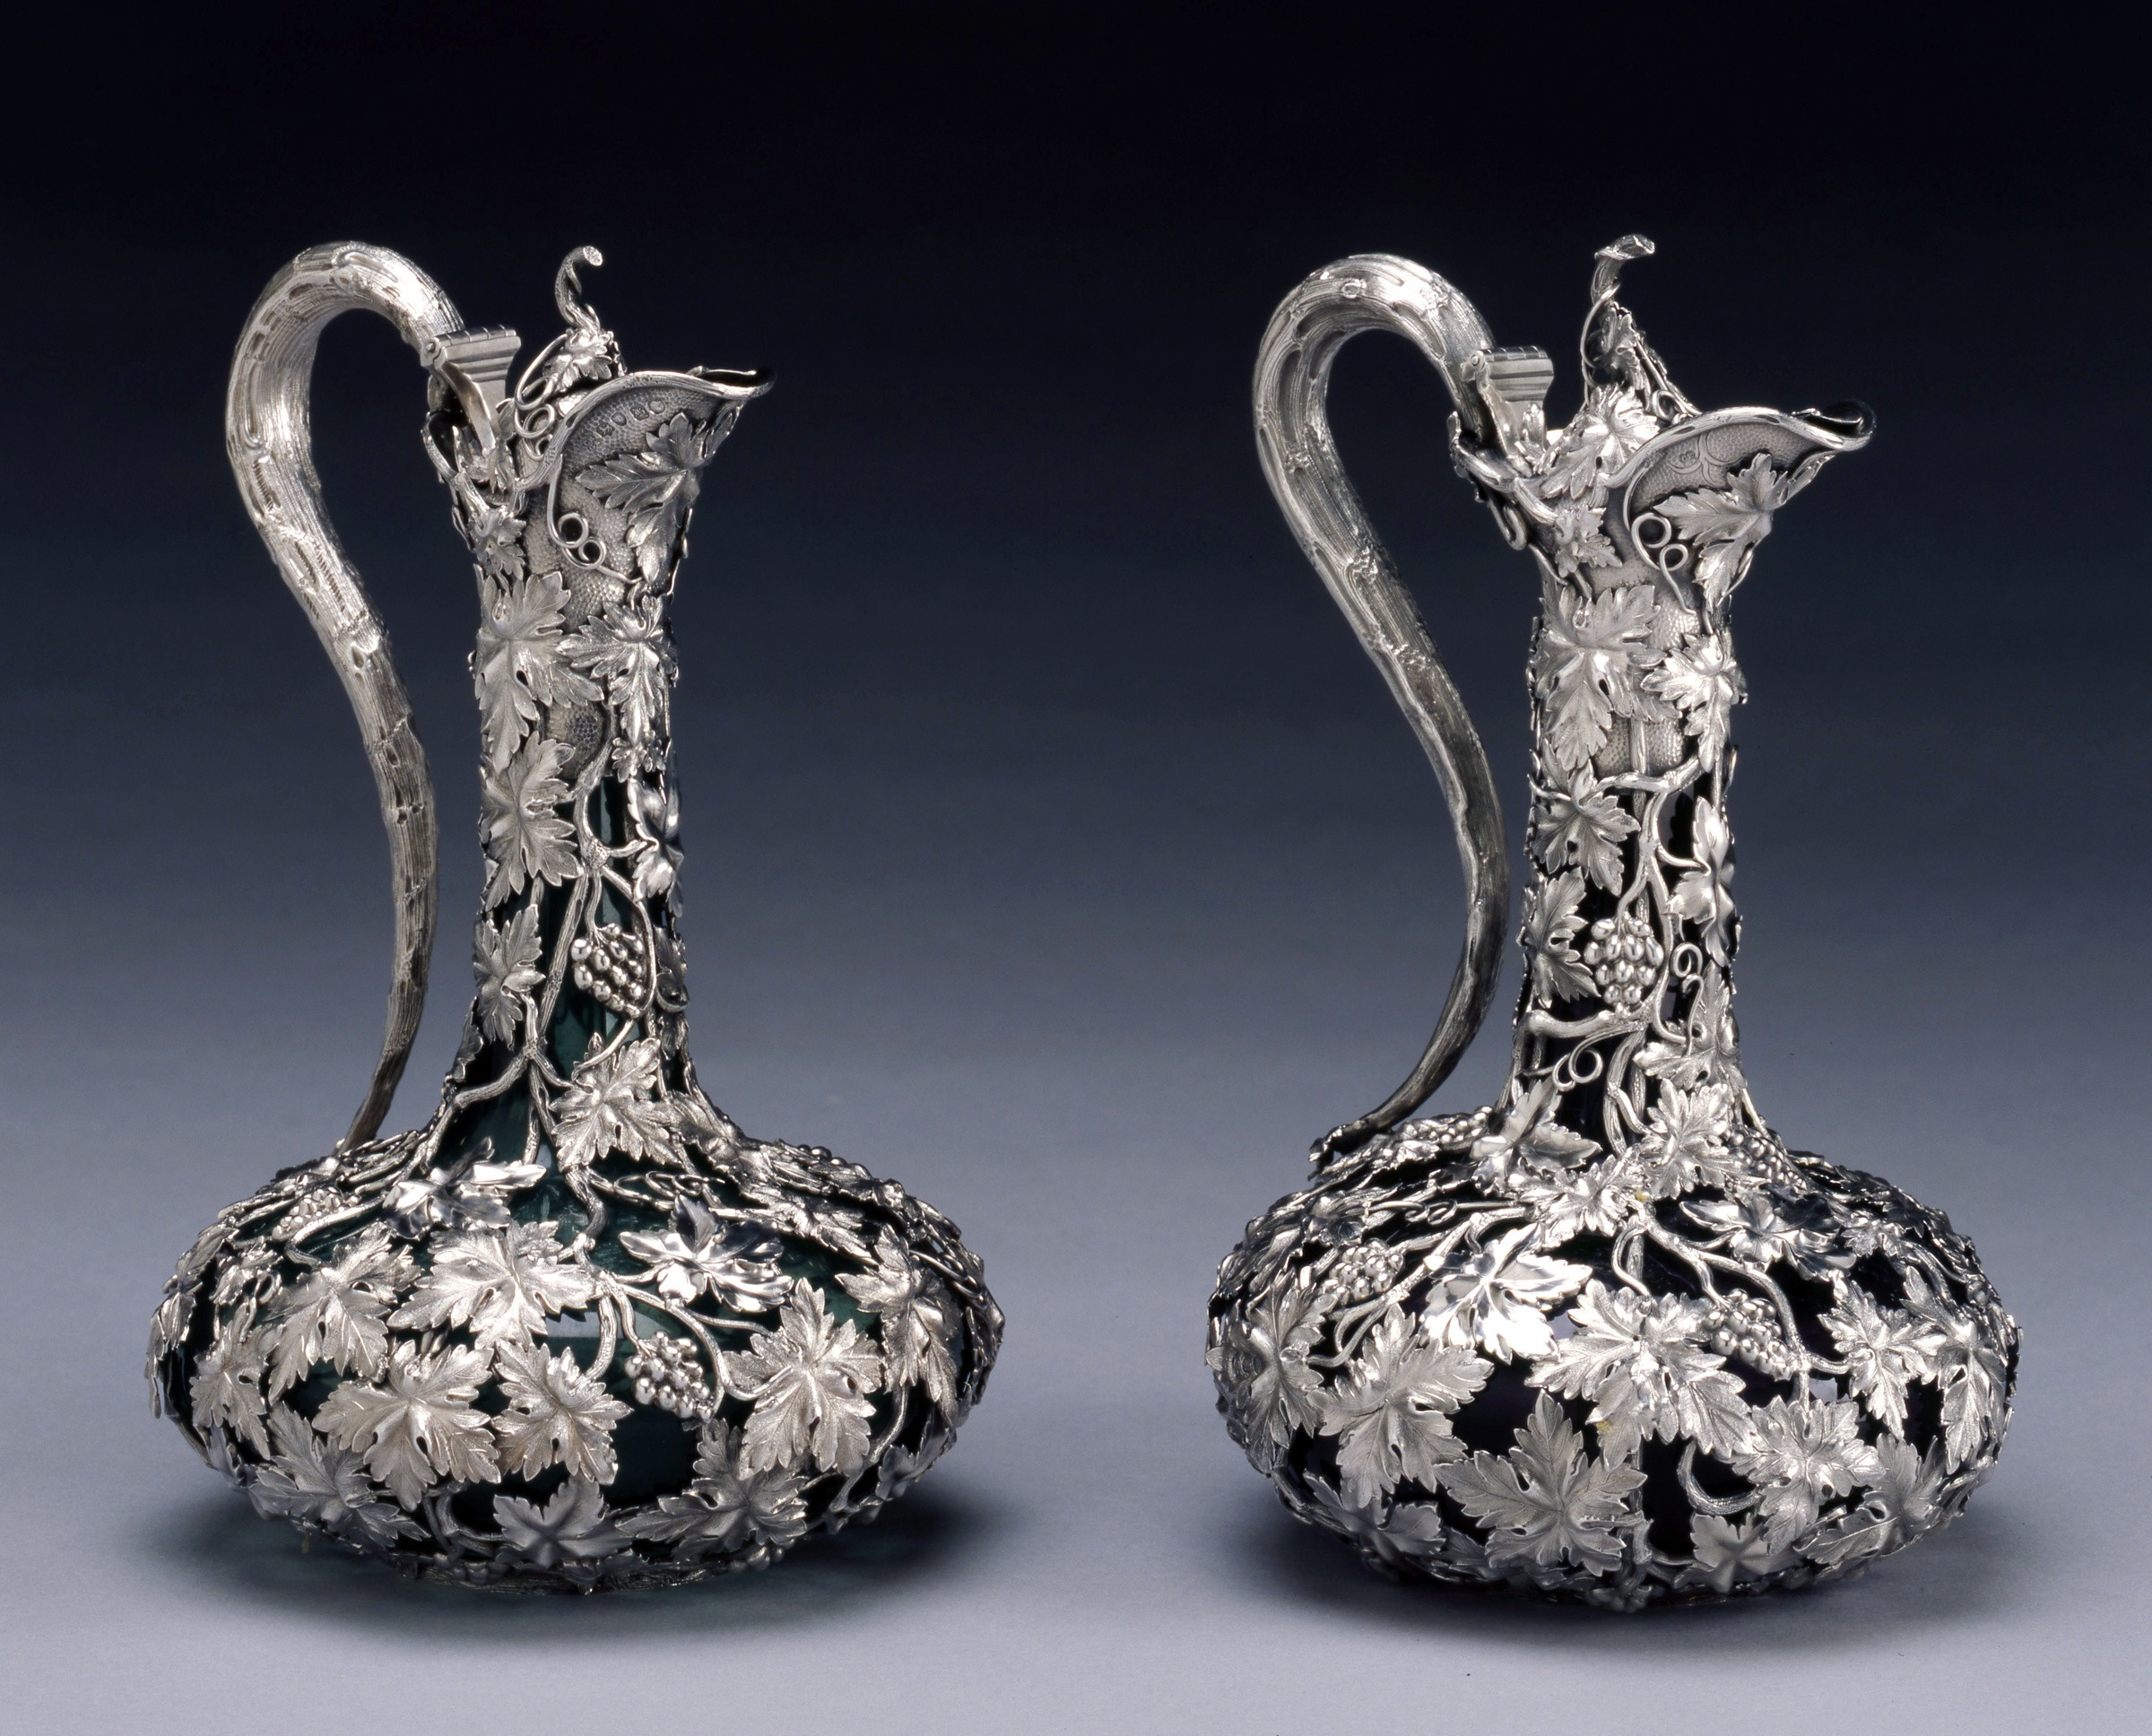 26 Elegant Antique Silver Glass Vase 2024 free download antique silver glass vase of charles reily george storer a pair of victorian claret jugs by inside a pair of victorian claret jugs by charles reily george storer